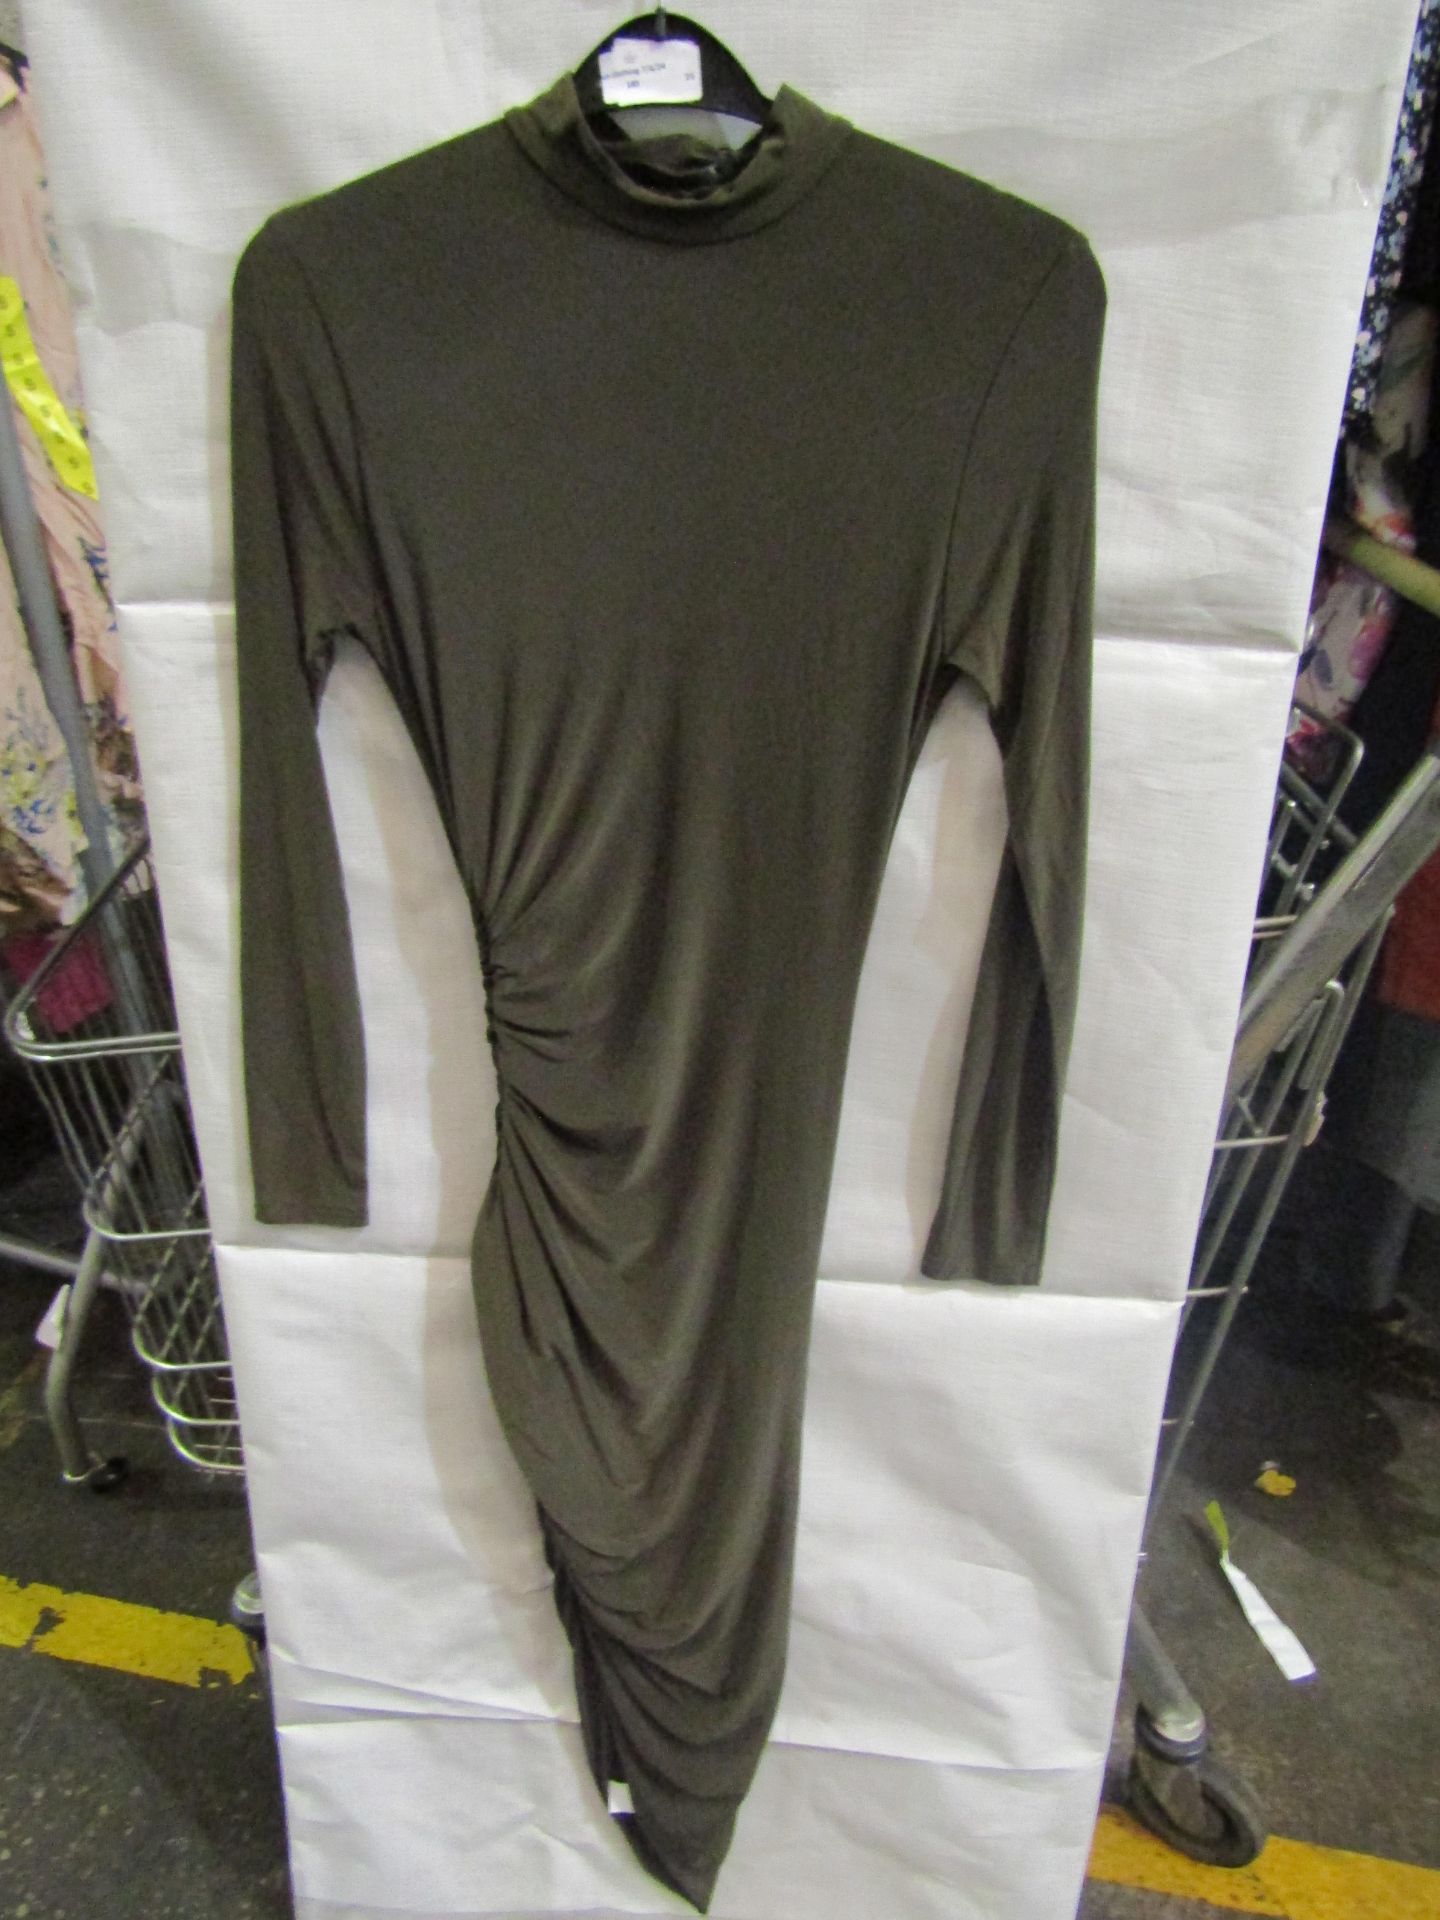 2x Miss Guided - Slinky Rucked Midi Khaki Dress - Size 22 Uk - New With Tags & Packaged. - Image 2 of 2